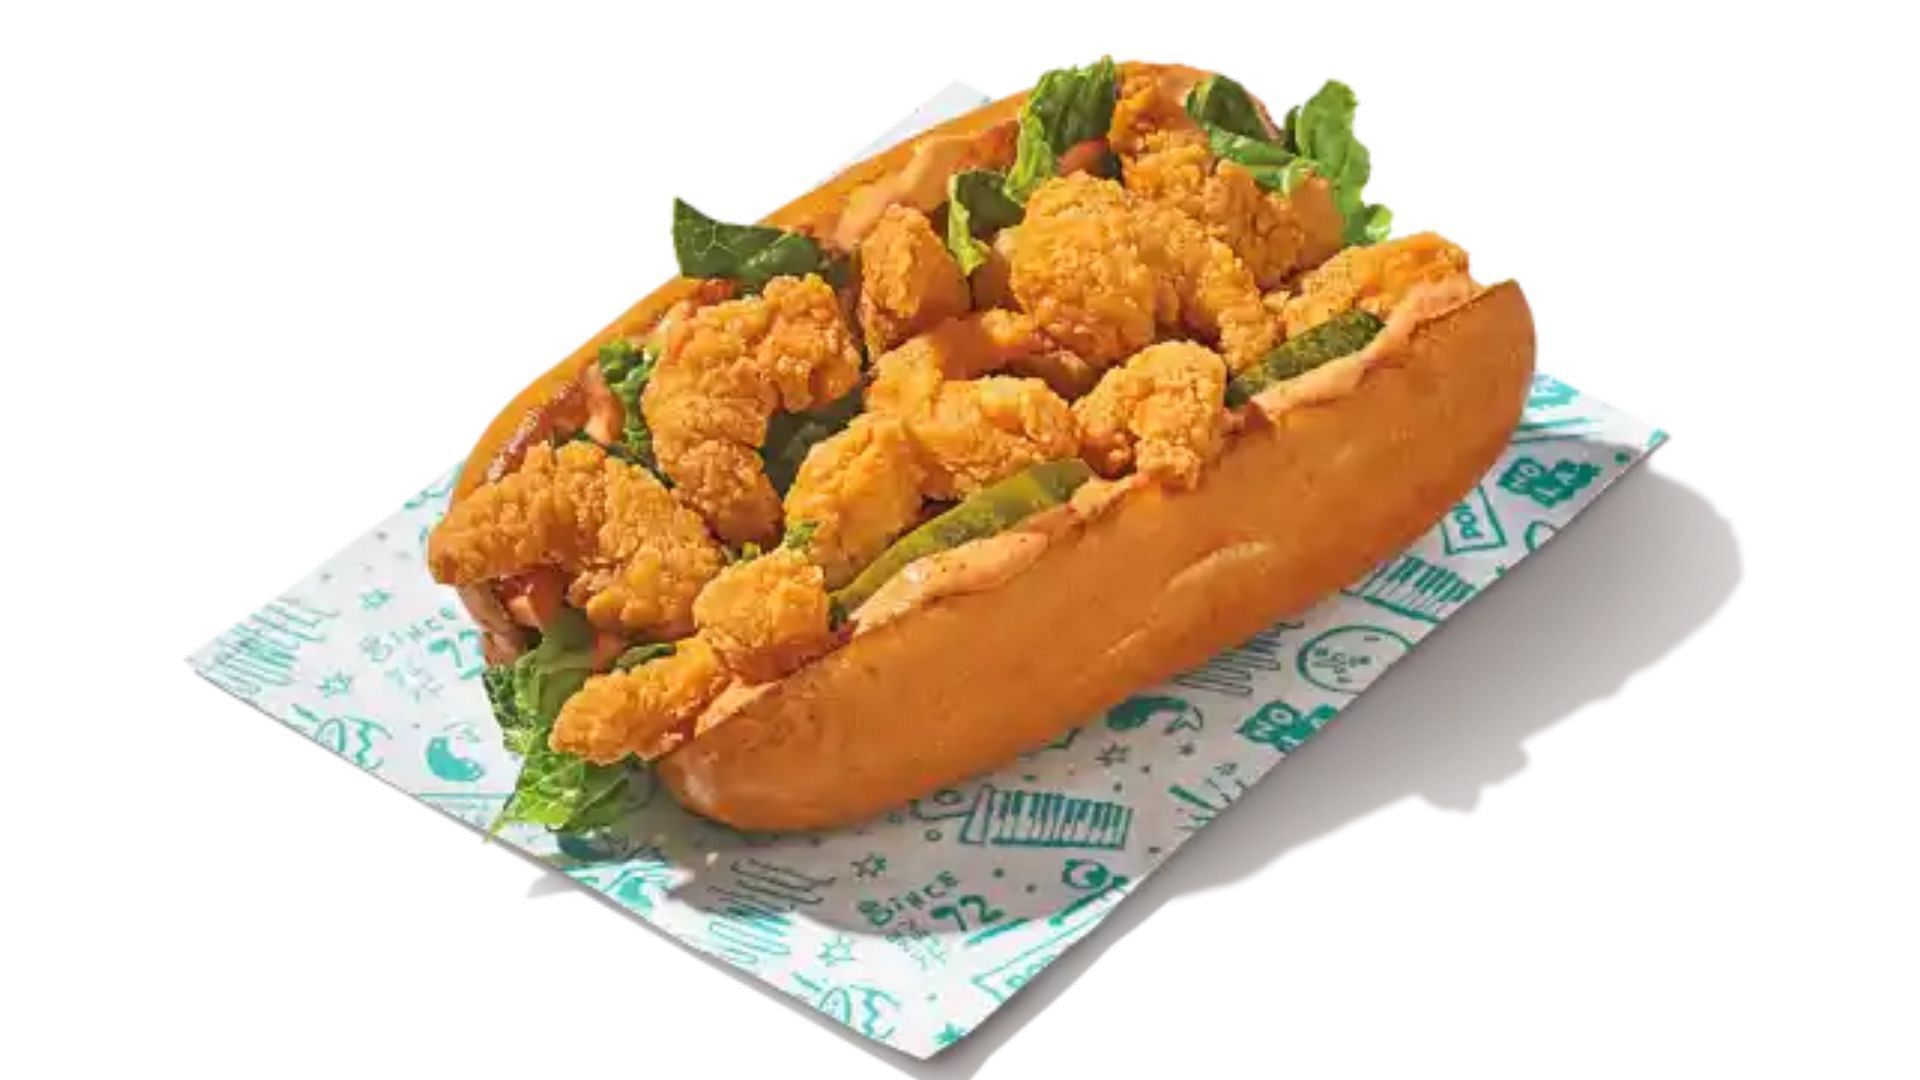 The new Shrimp Roll will be avaialble as a test item at limited loactions, including Lantana, Florida, at a suggested price of $3.99 (Image via Popeyes)